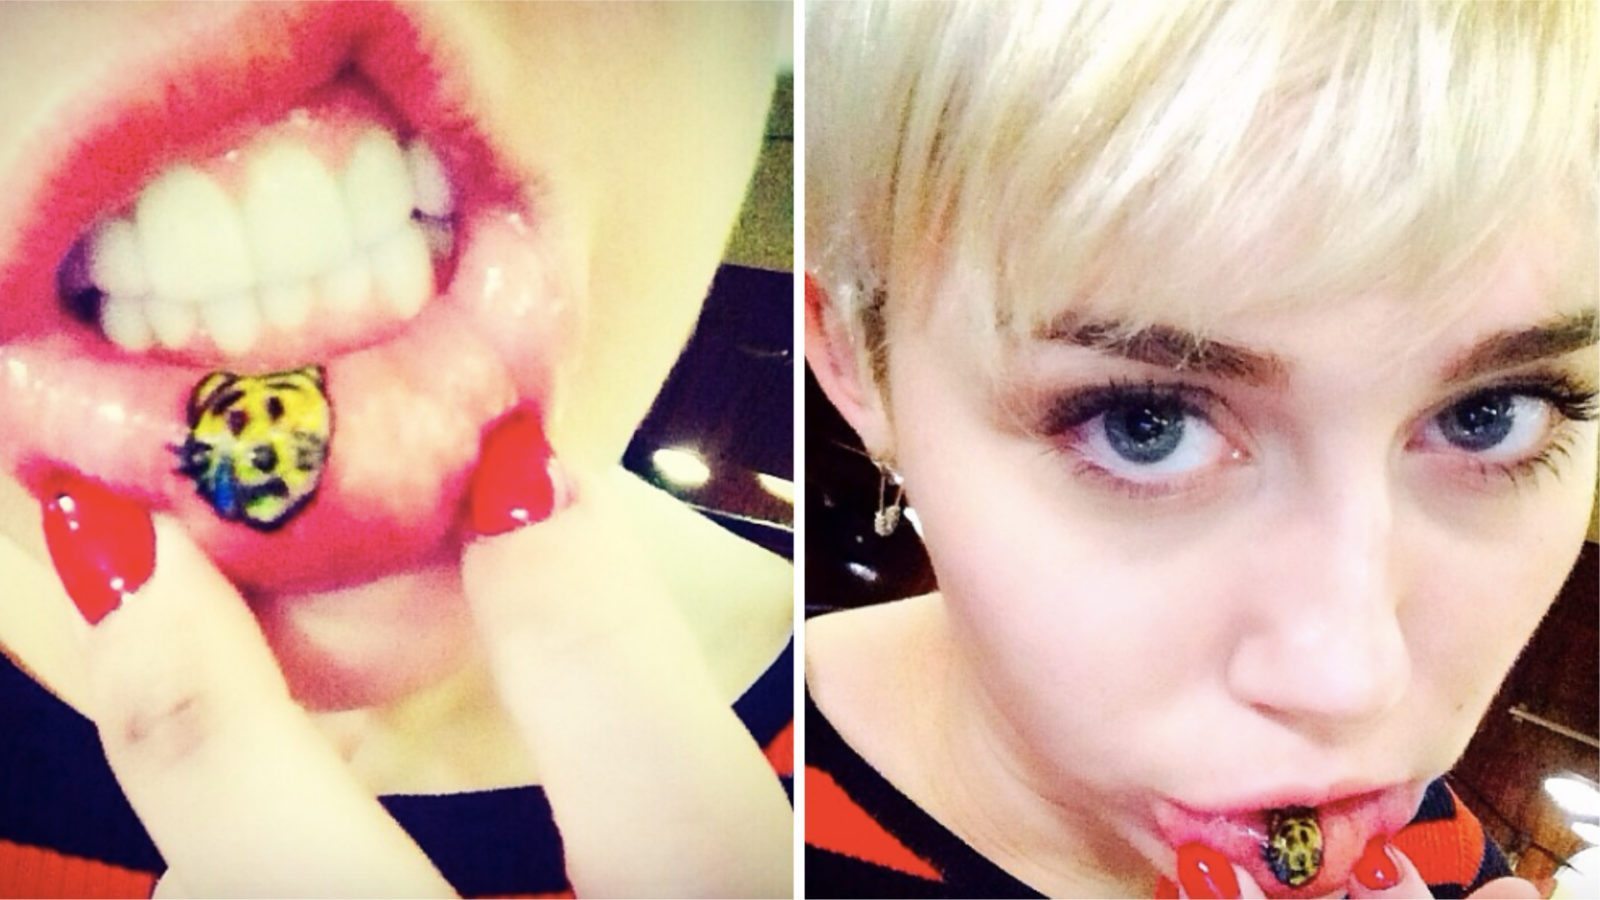 Lip tattoos: All the bizarre things people get tattooed on their inner lip from sad kitties to dinosaurs